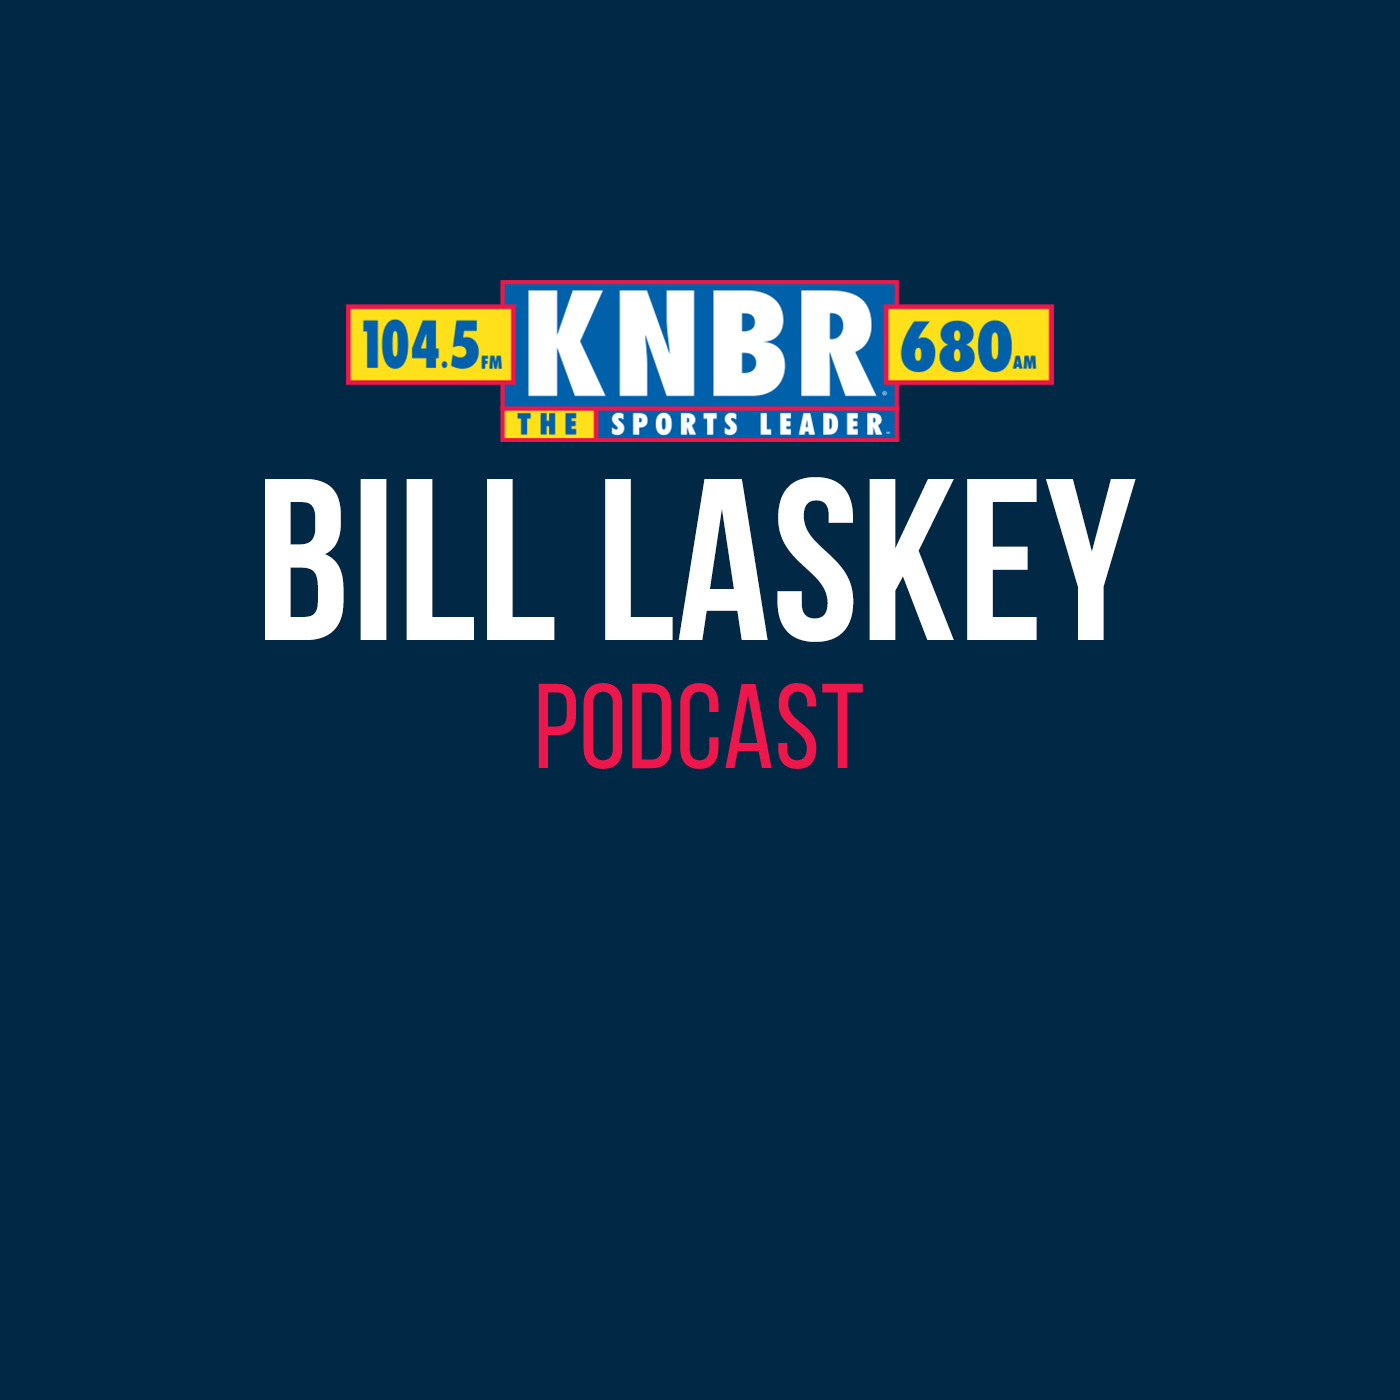 5-25 Roger McDowell joins Extra Innings with Bill Laskey to revisit his 108-win season with the Mets in 1986 and what it took to win that World Series